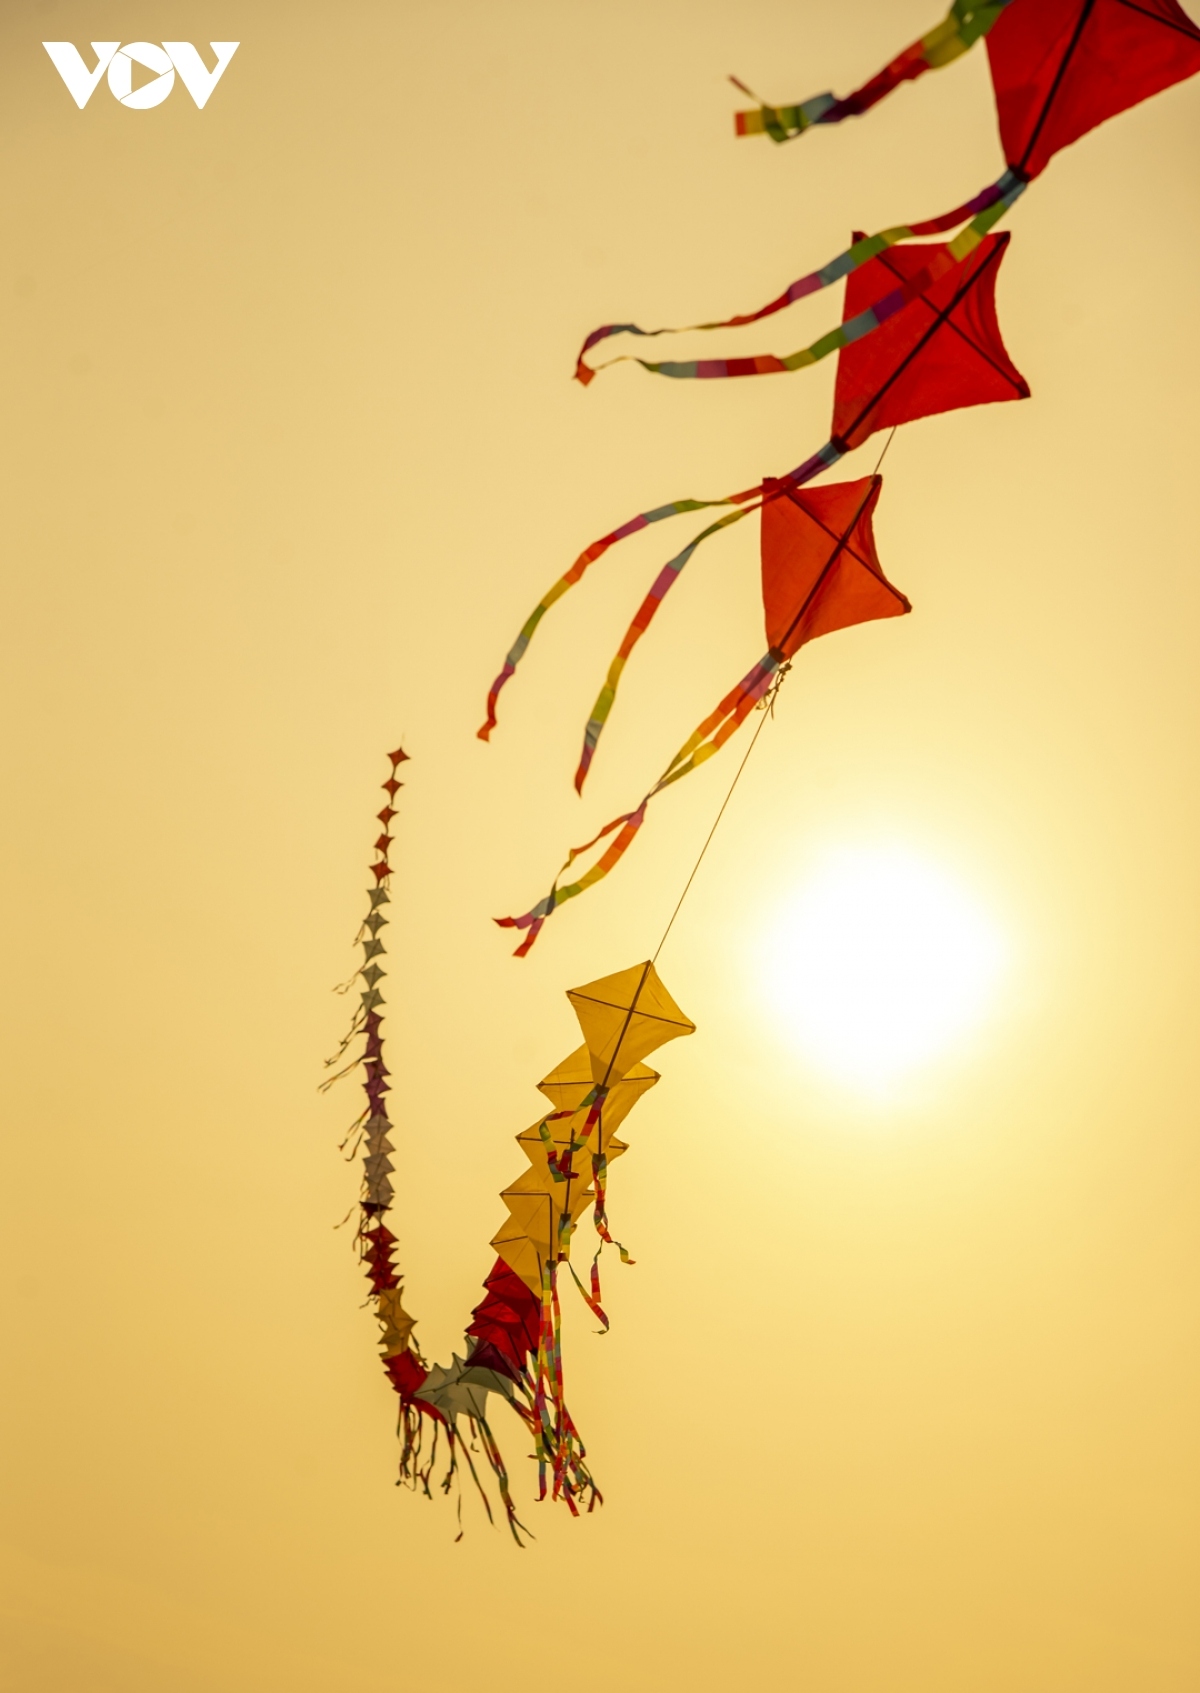 kites flying high in the sky in central vietnam picture 7